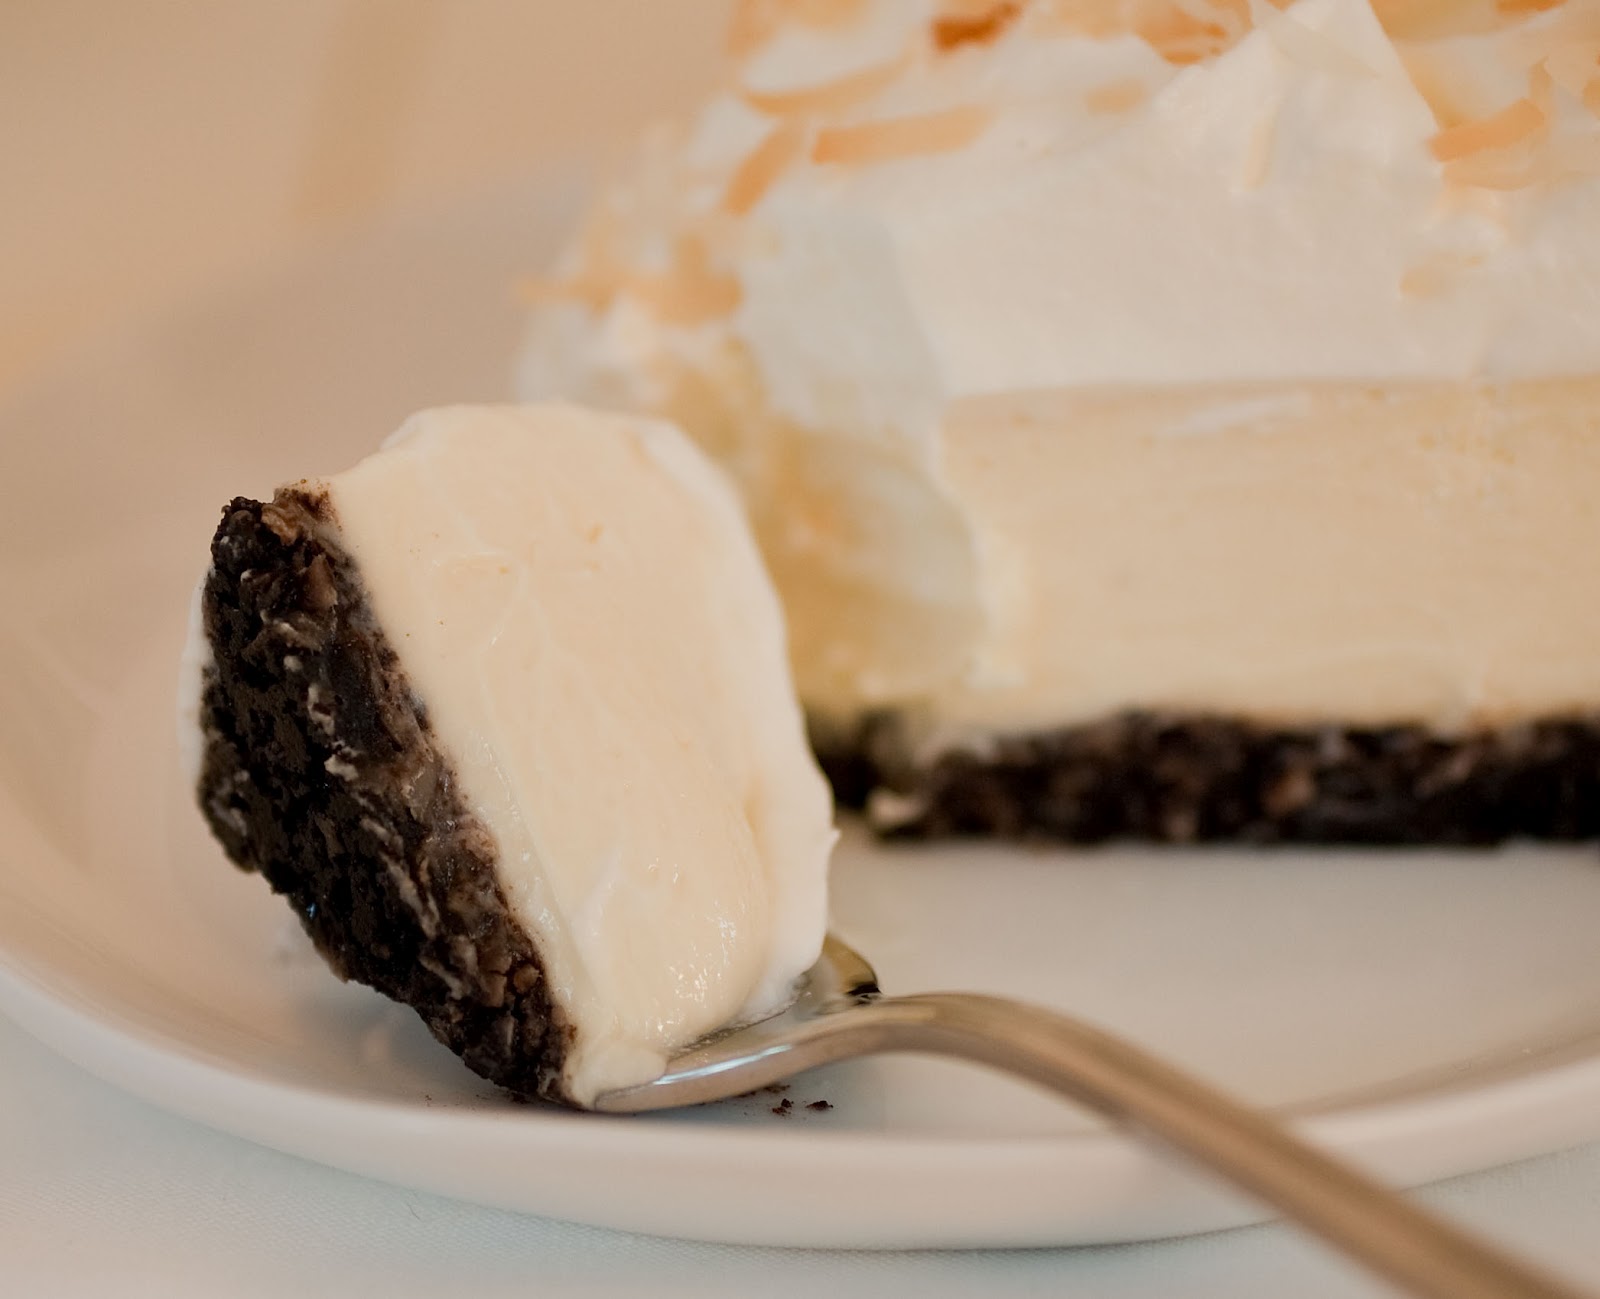 Tish Boyle Sweet Dreams: Coconut Cheesecake with a Chocolate Crust